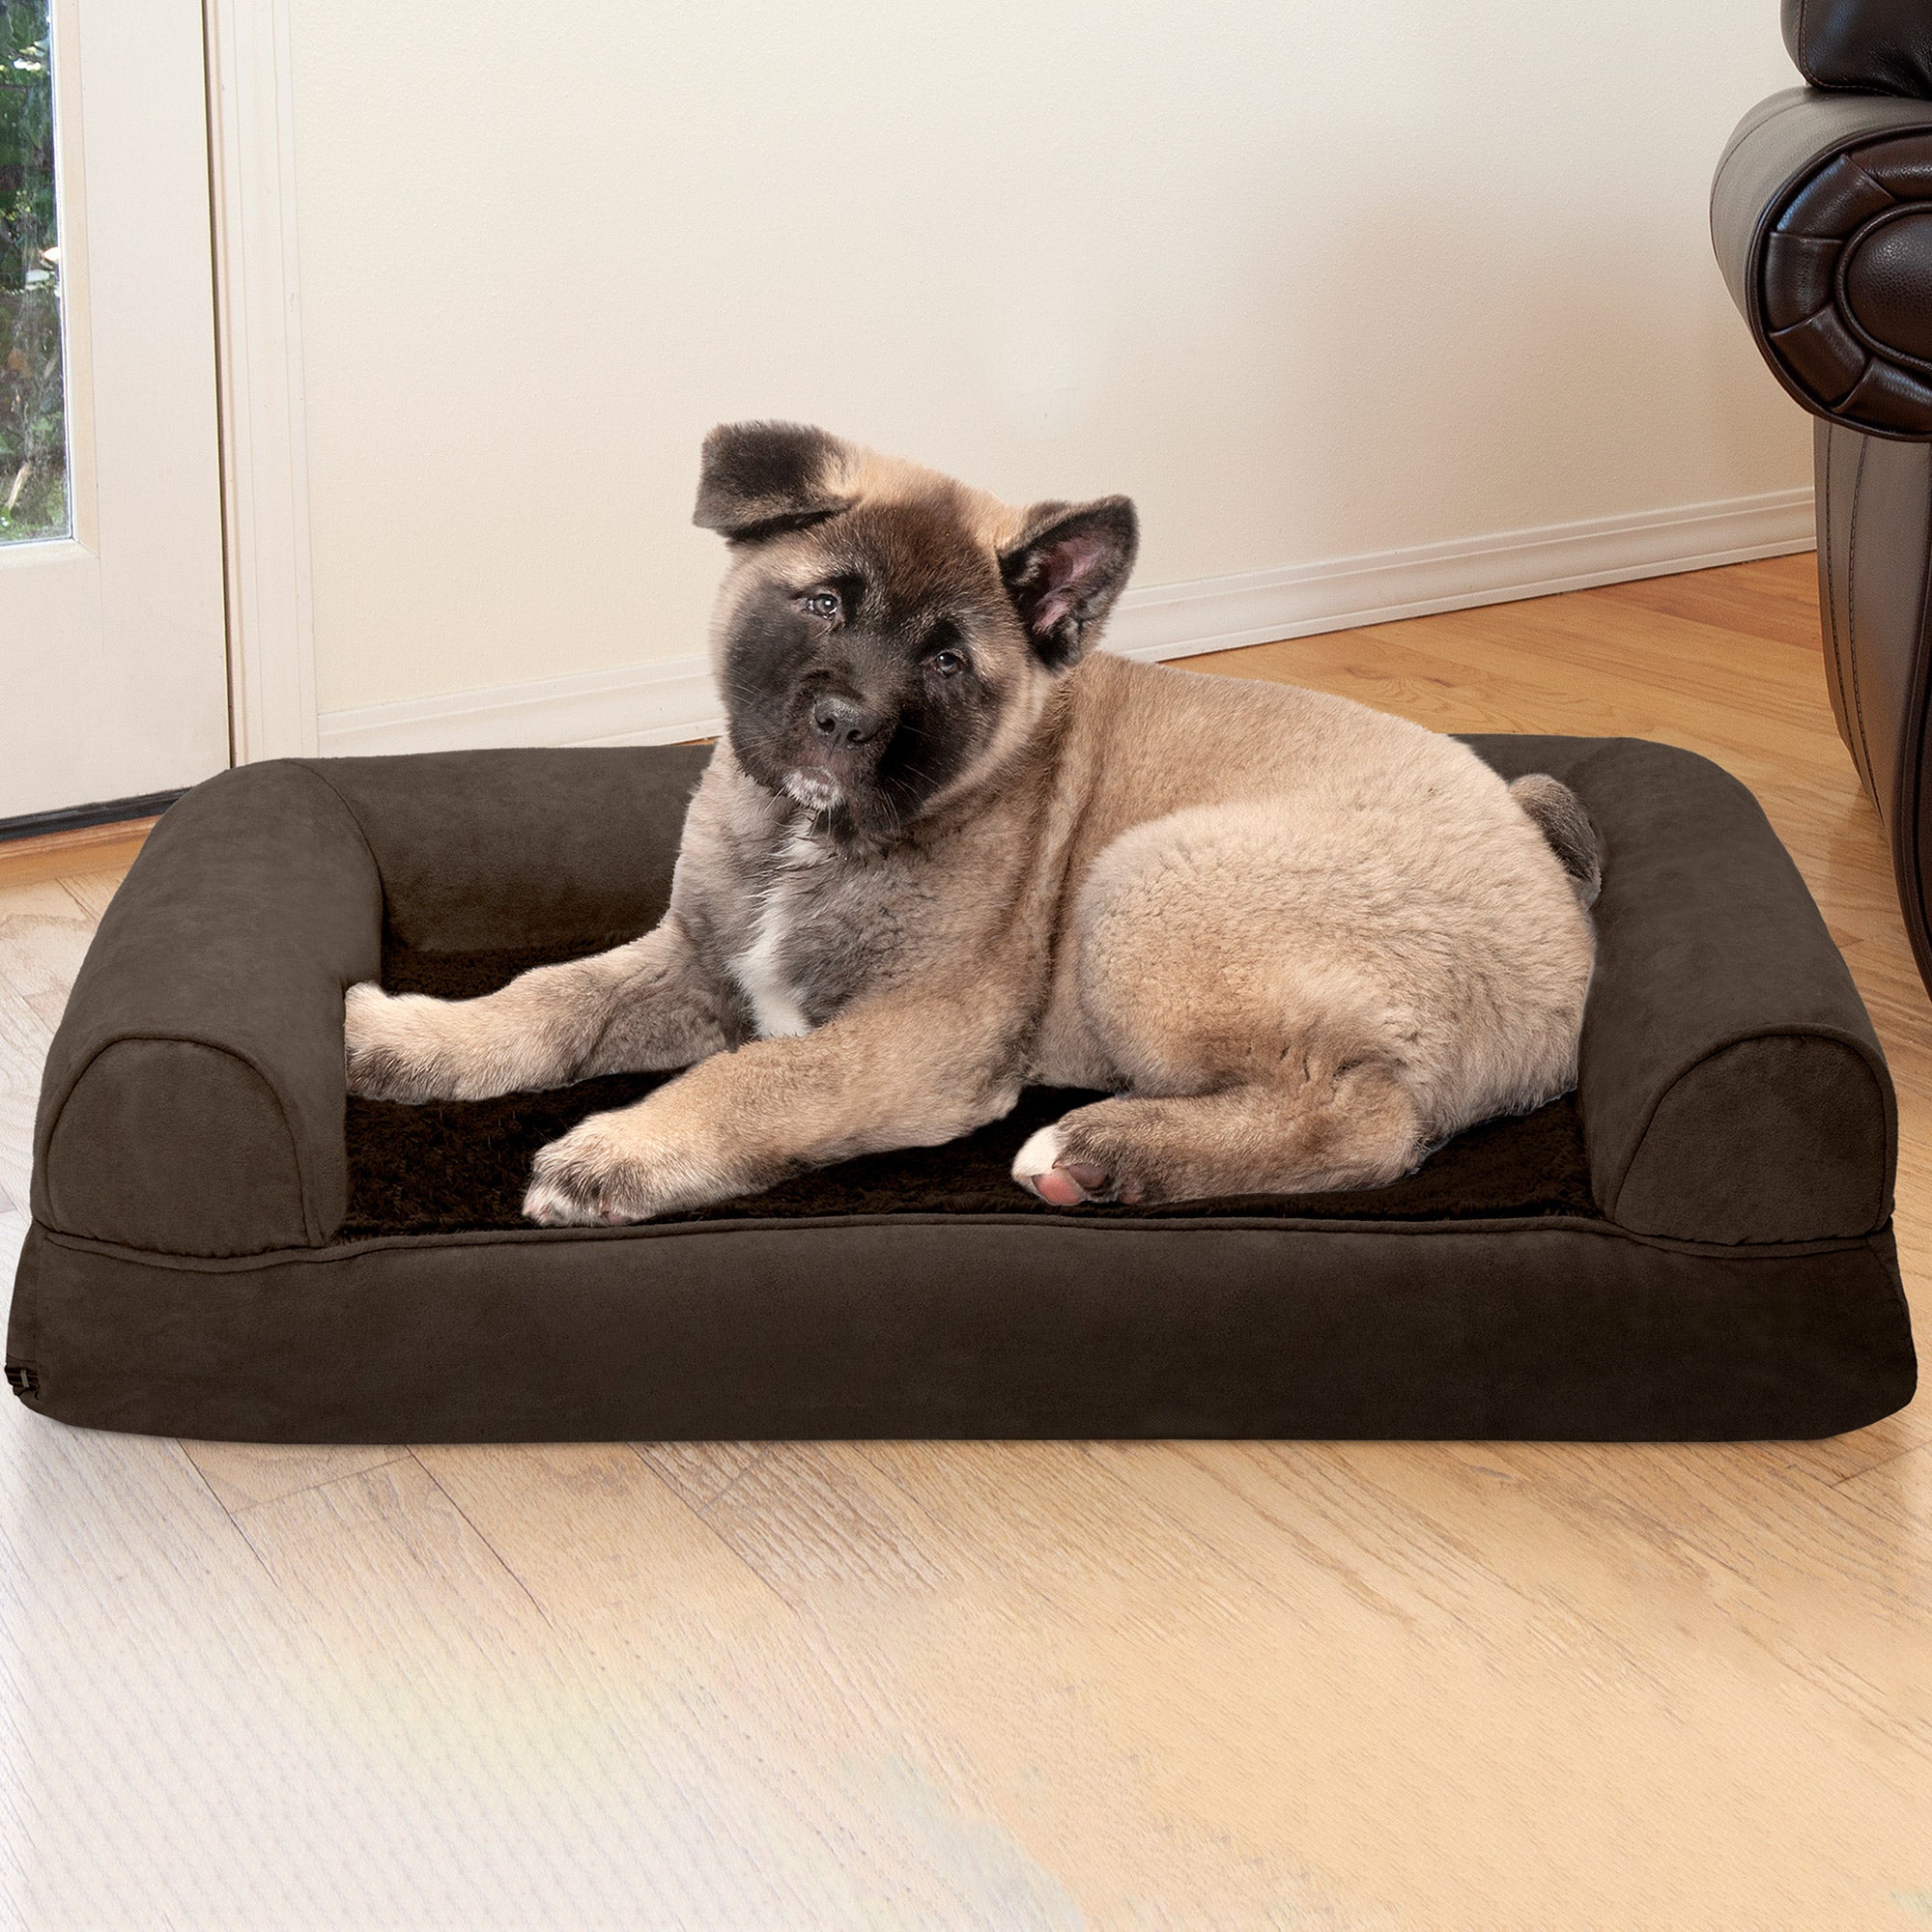 FurHaven Pet Products | Memory Foam Plush and Suede Sofa Pet Bed for Dogs and Cats， Espresso， Medium